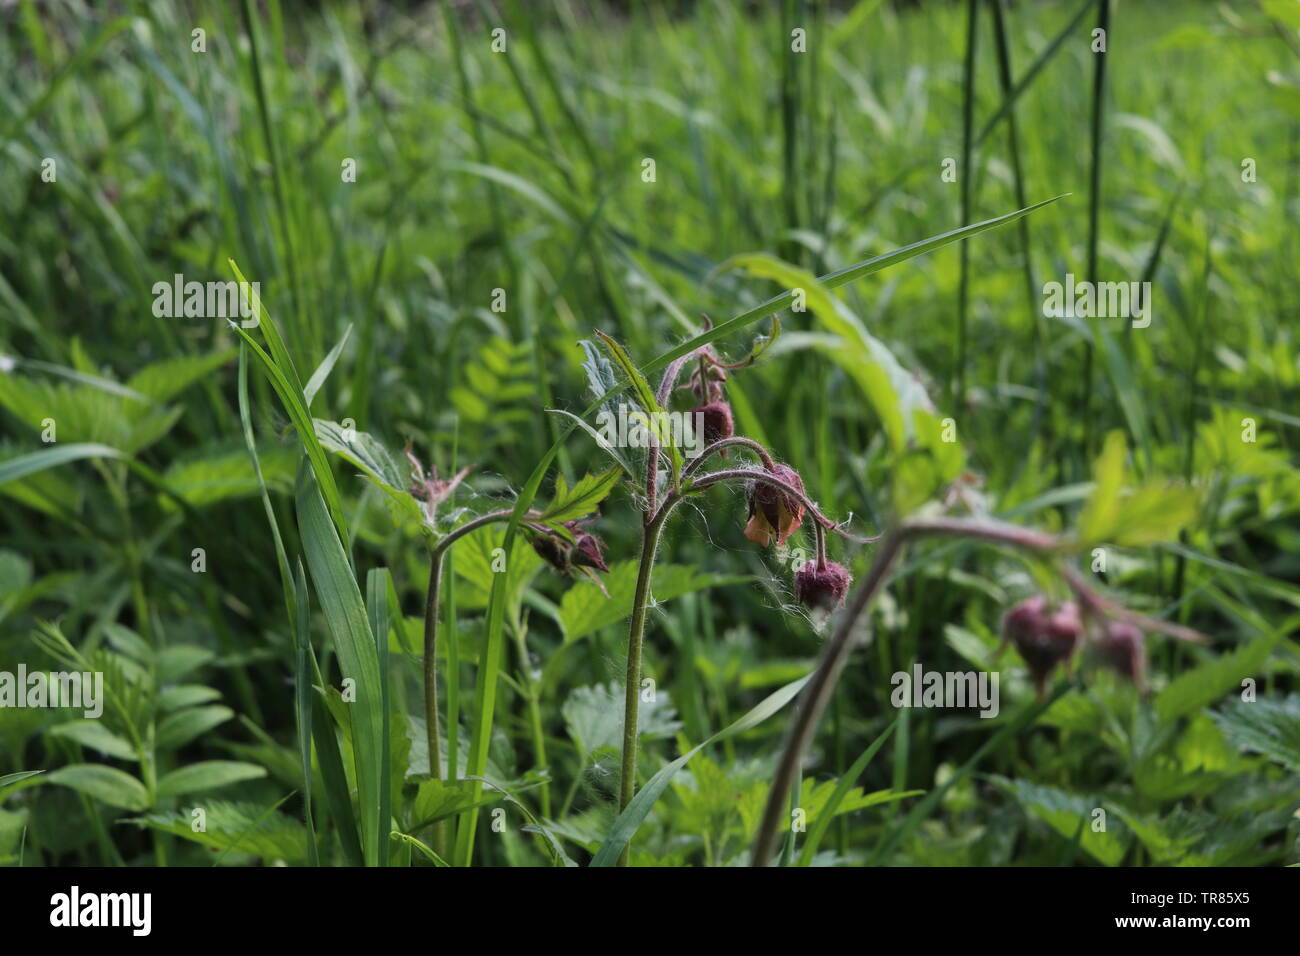 Berry blossoms leaning down towards a grassy ground. Stock Photo